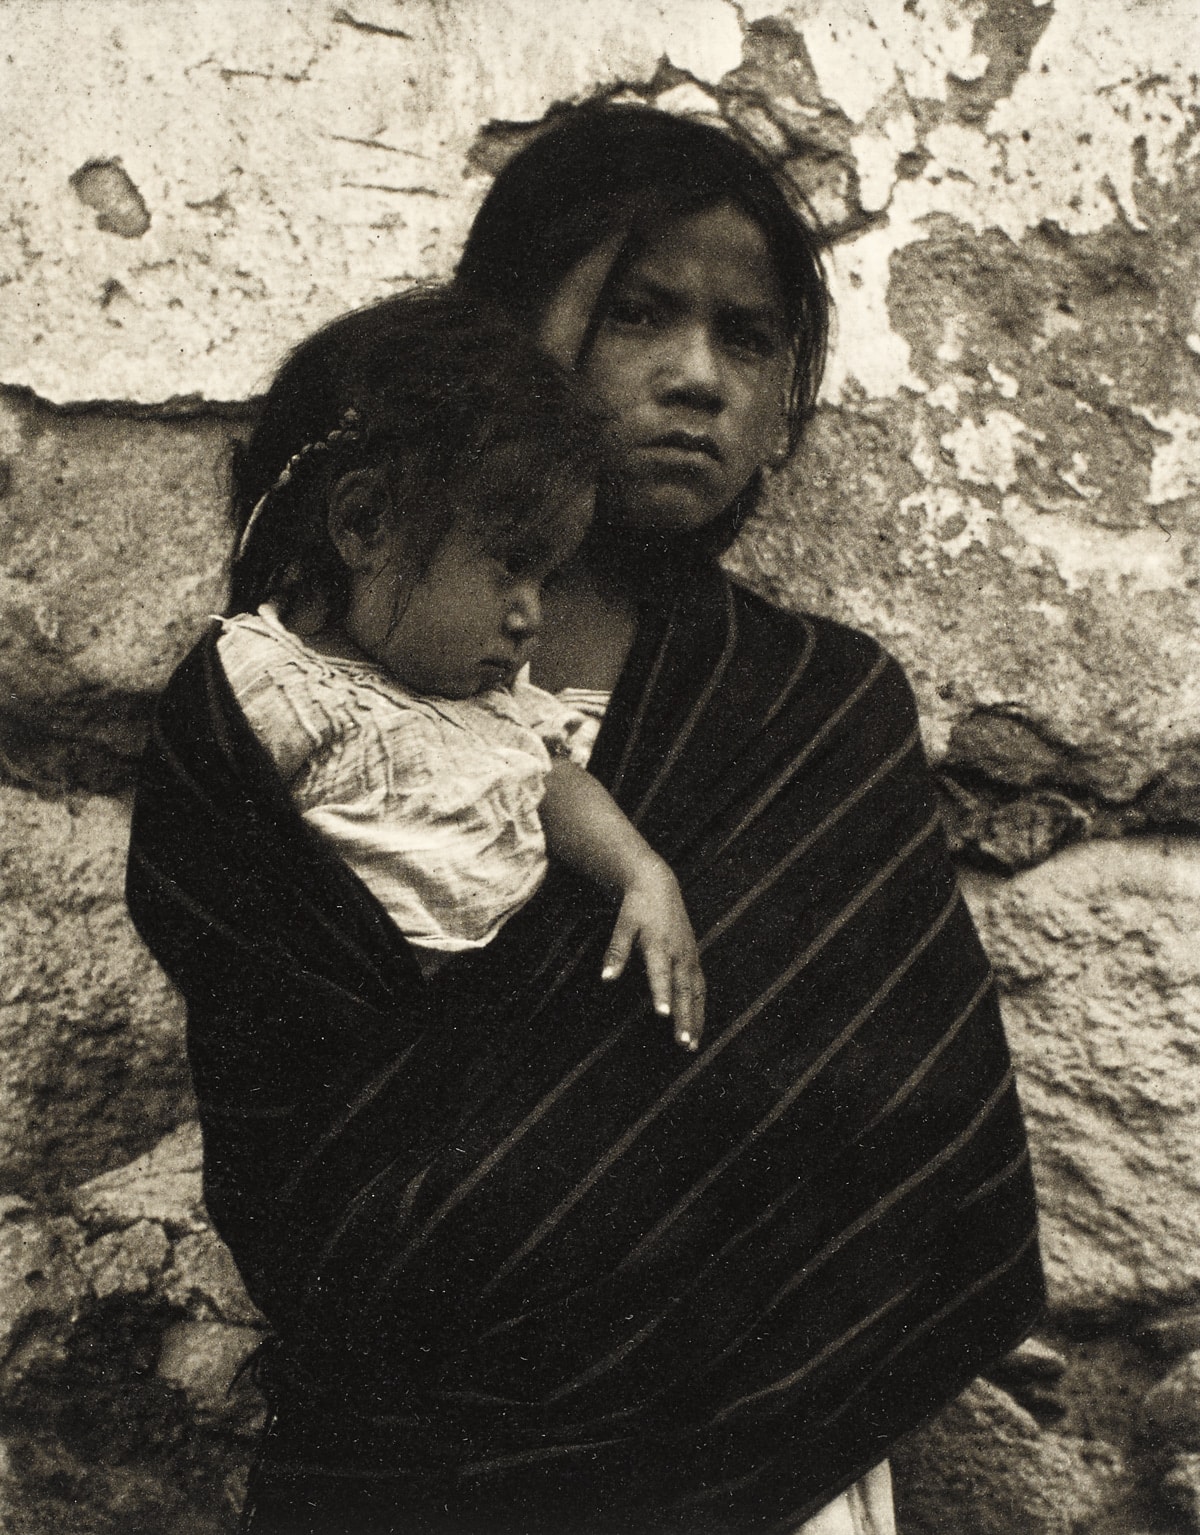 Girl and Child, Toluca, Mexico